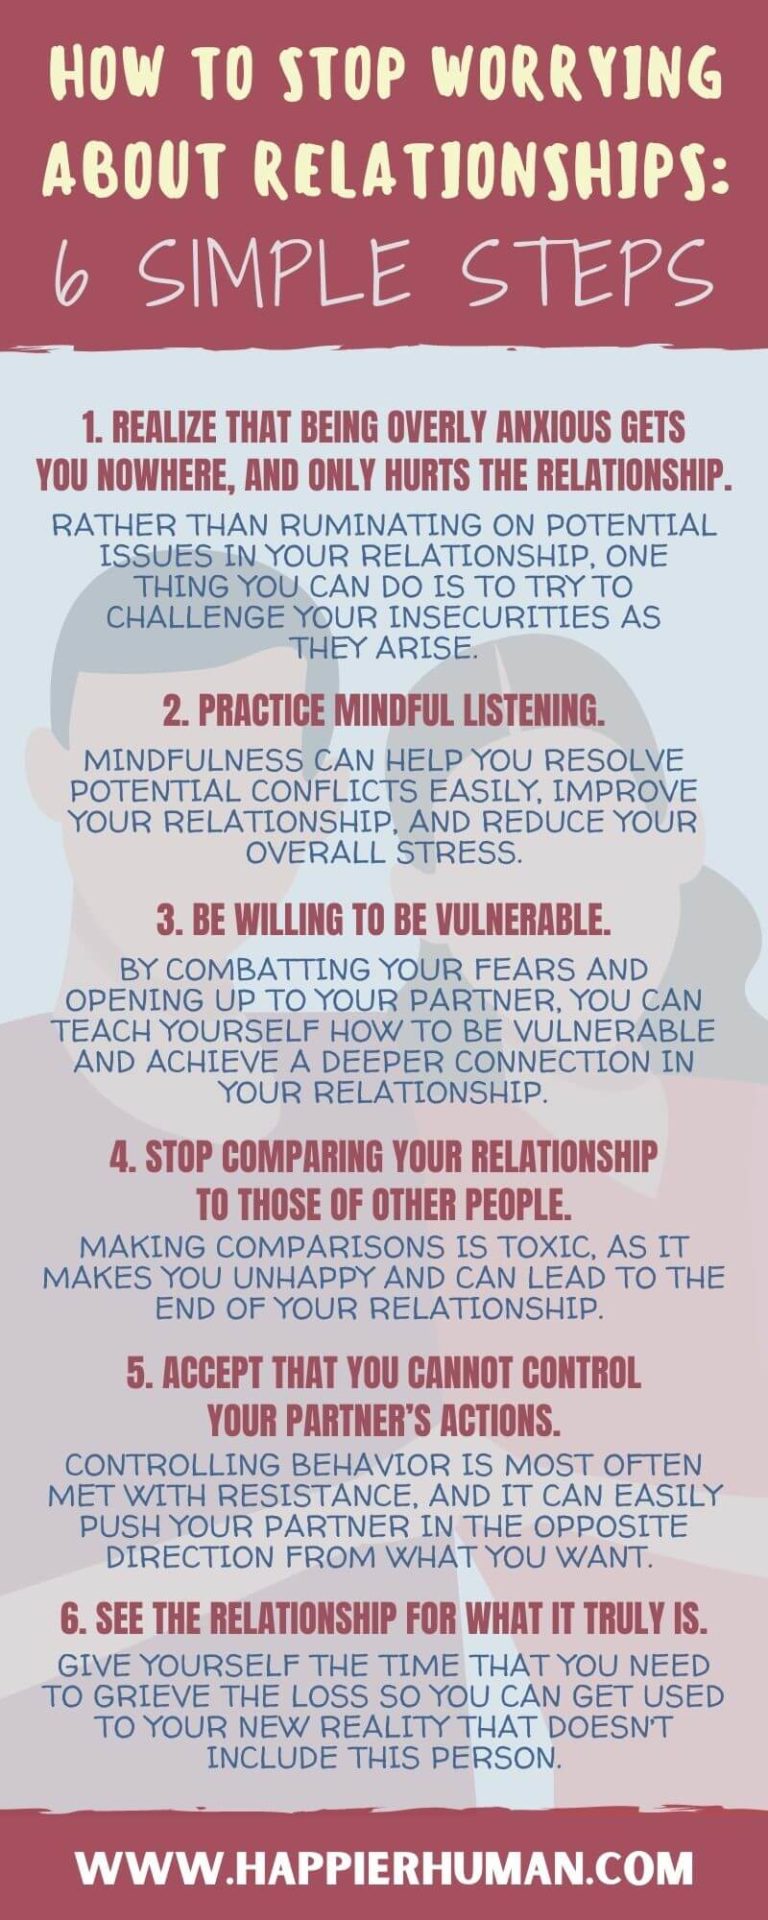 6 Steps to Stop Worrying About Your Relationship - Happier Human